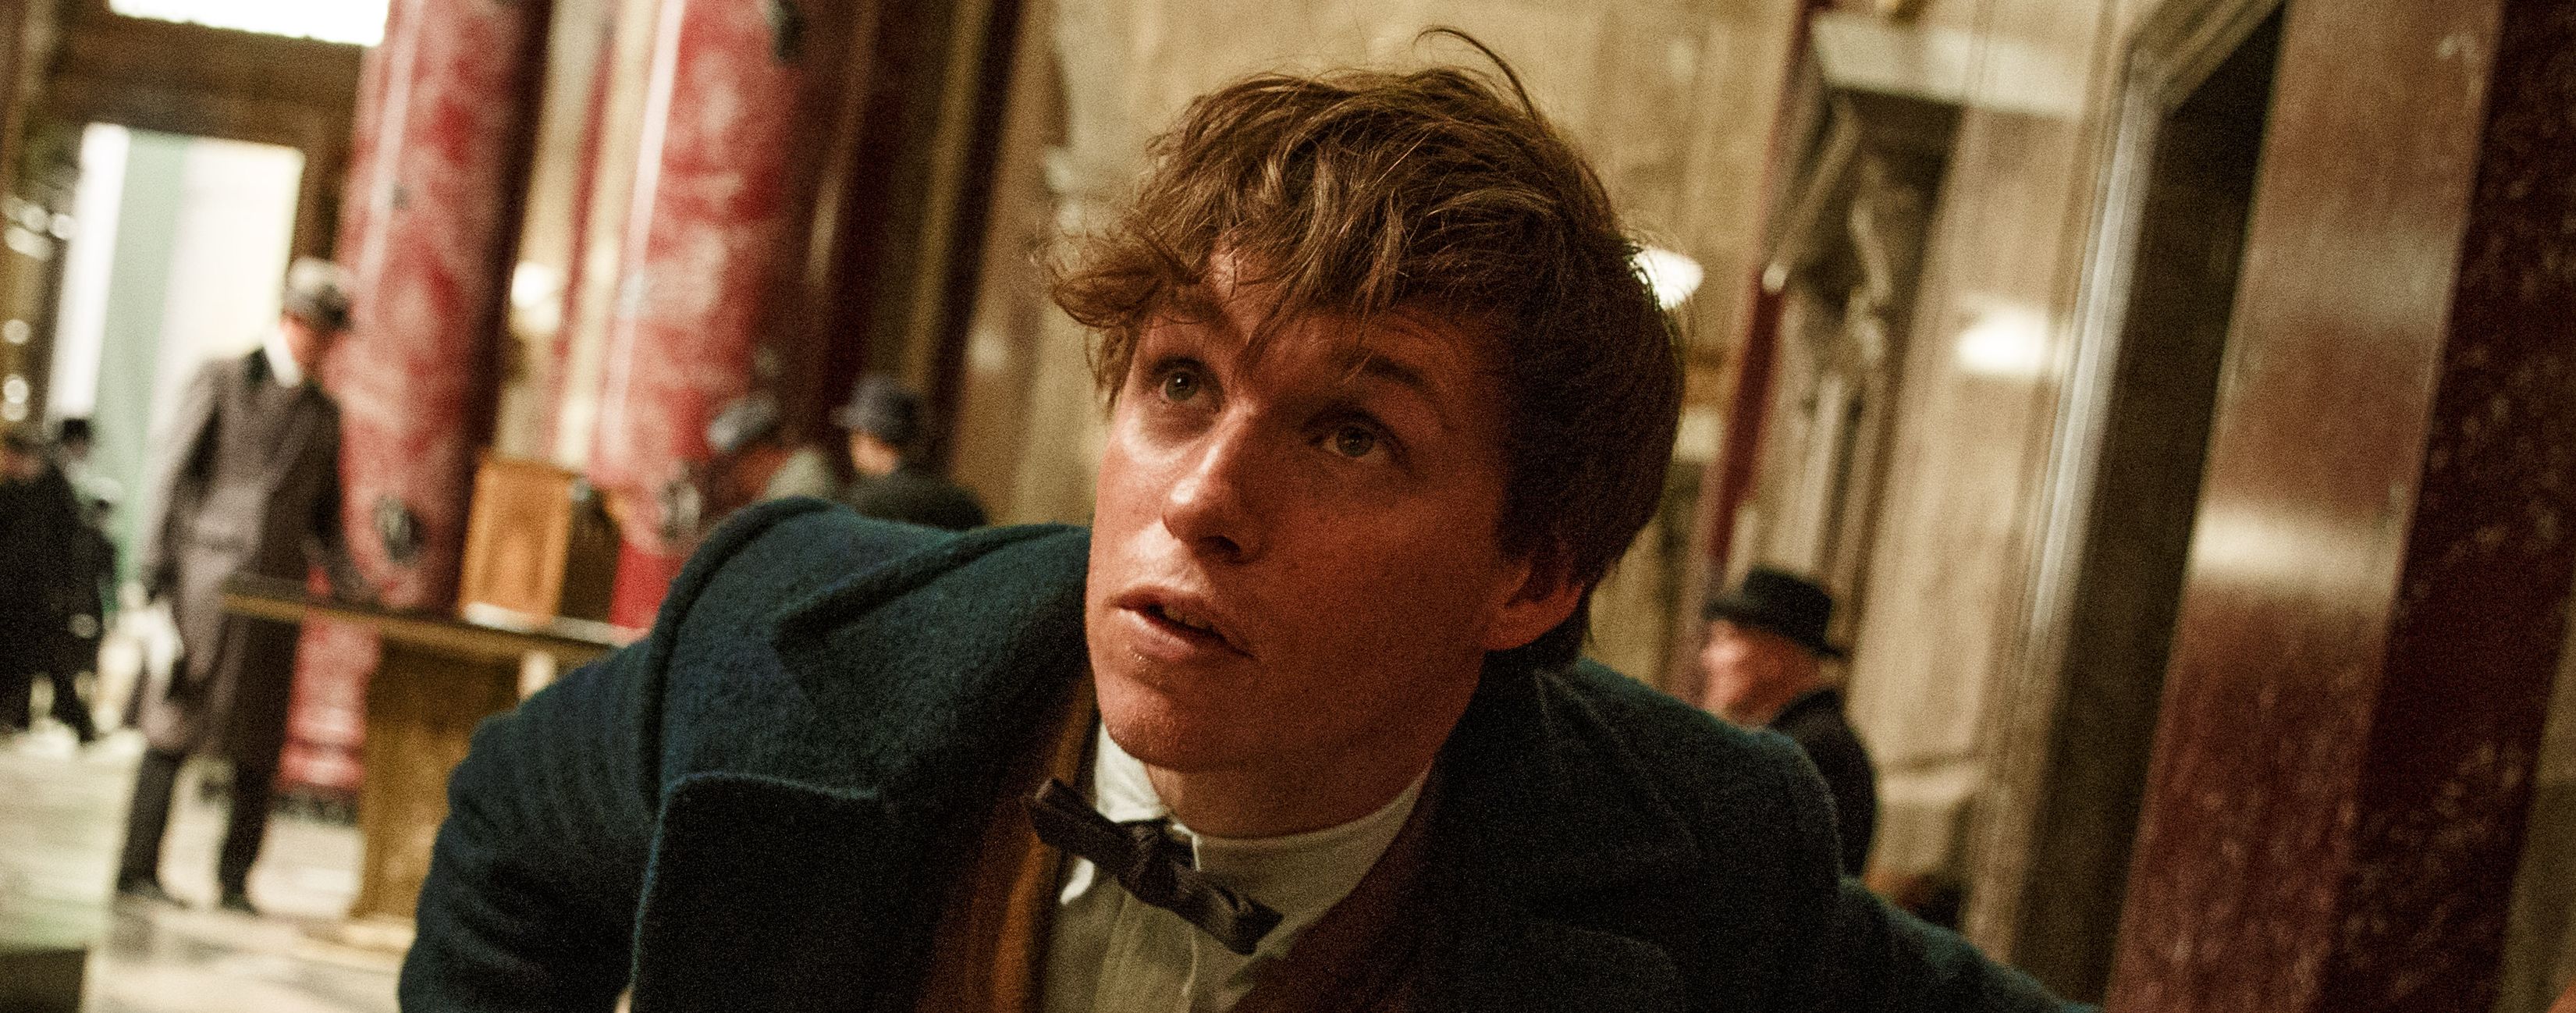 Eddie Redmayne, Fantastic Beasts and Where to Find Them